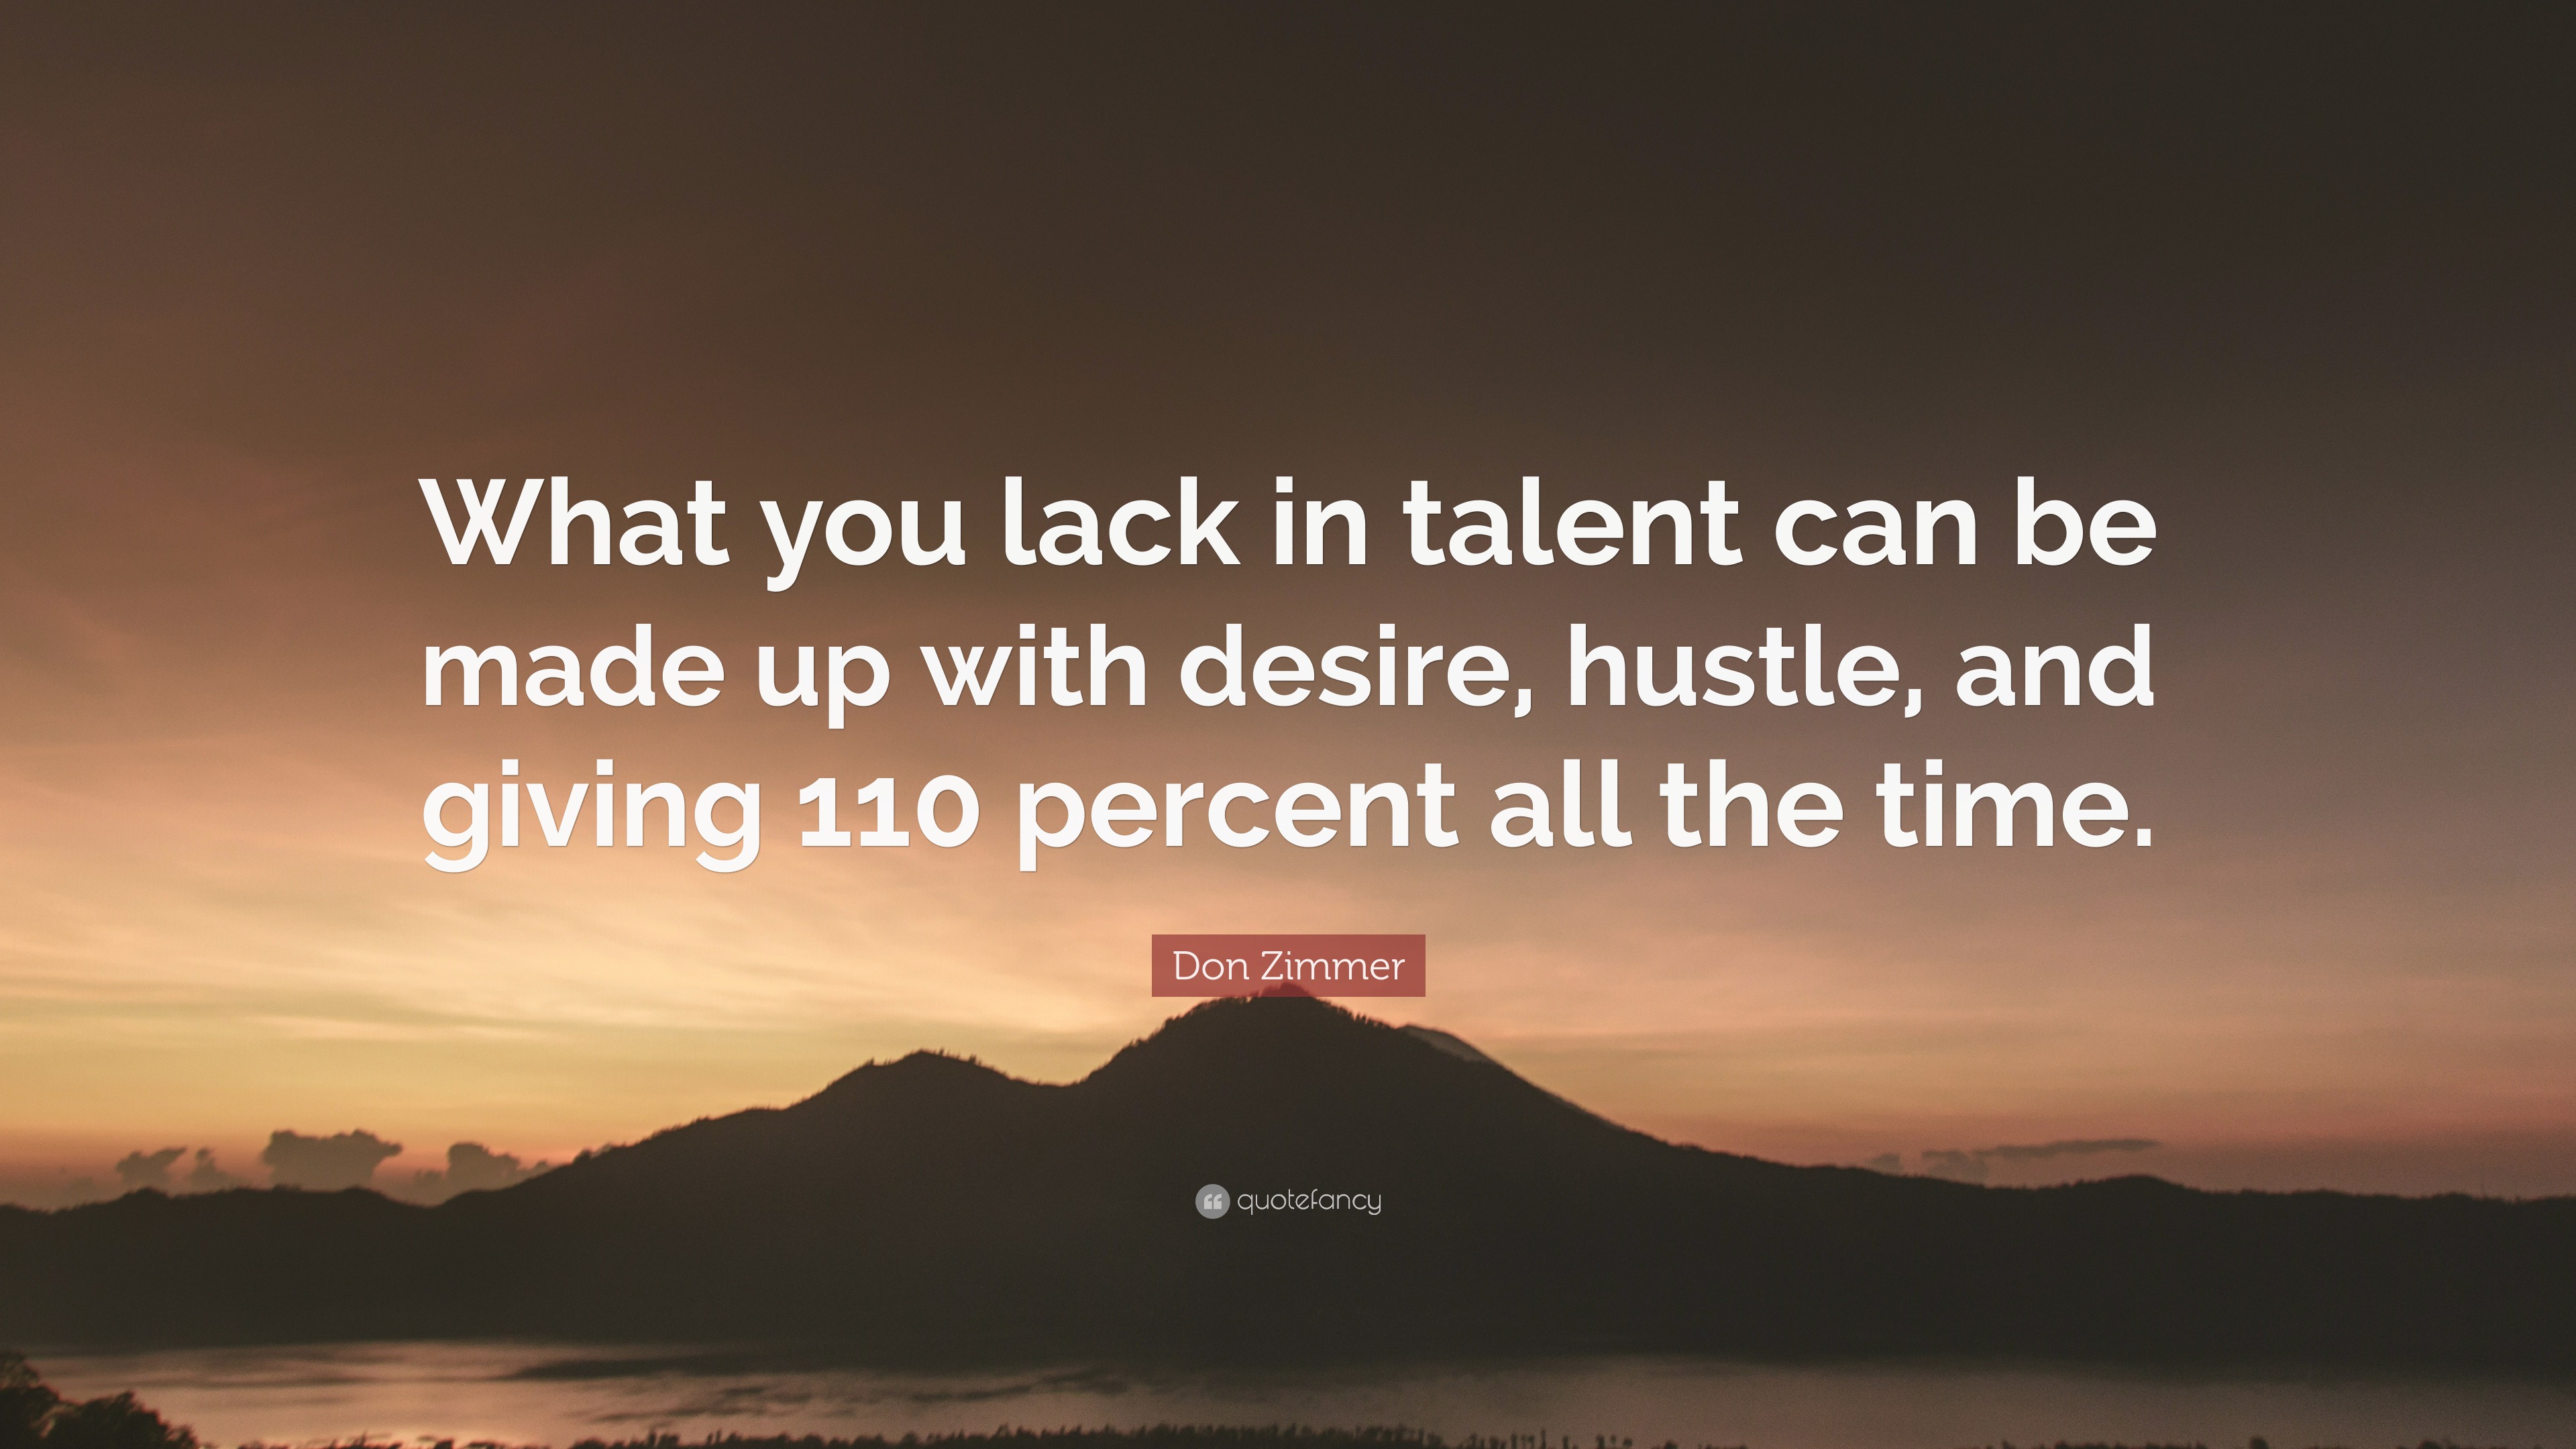 What you lack in talent can be made up with desire, hustle and giving 110%  all the time. ~Don Zimmer